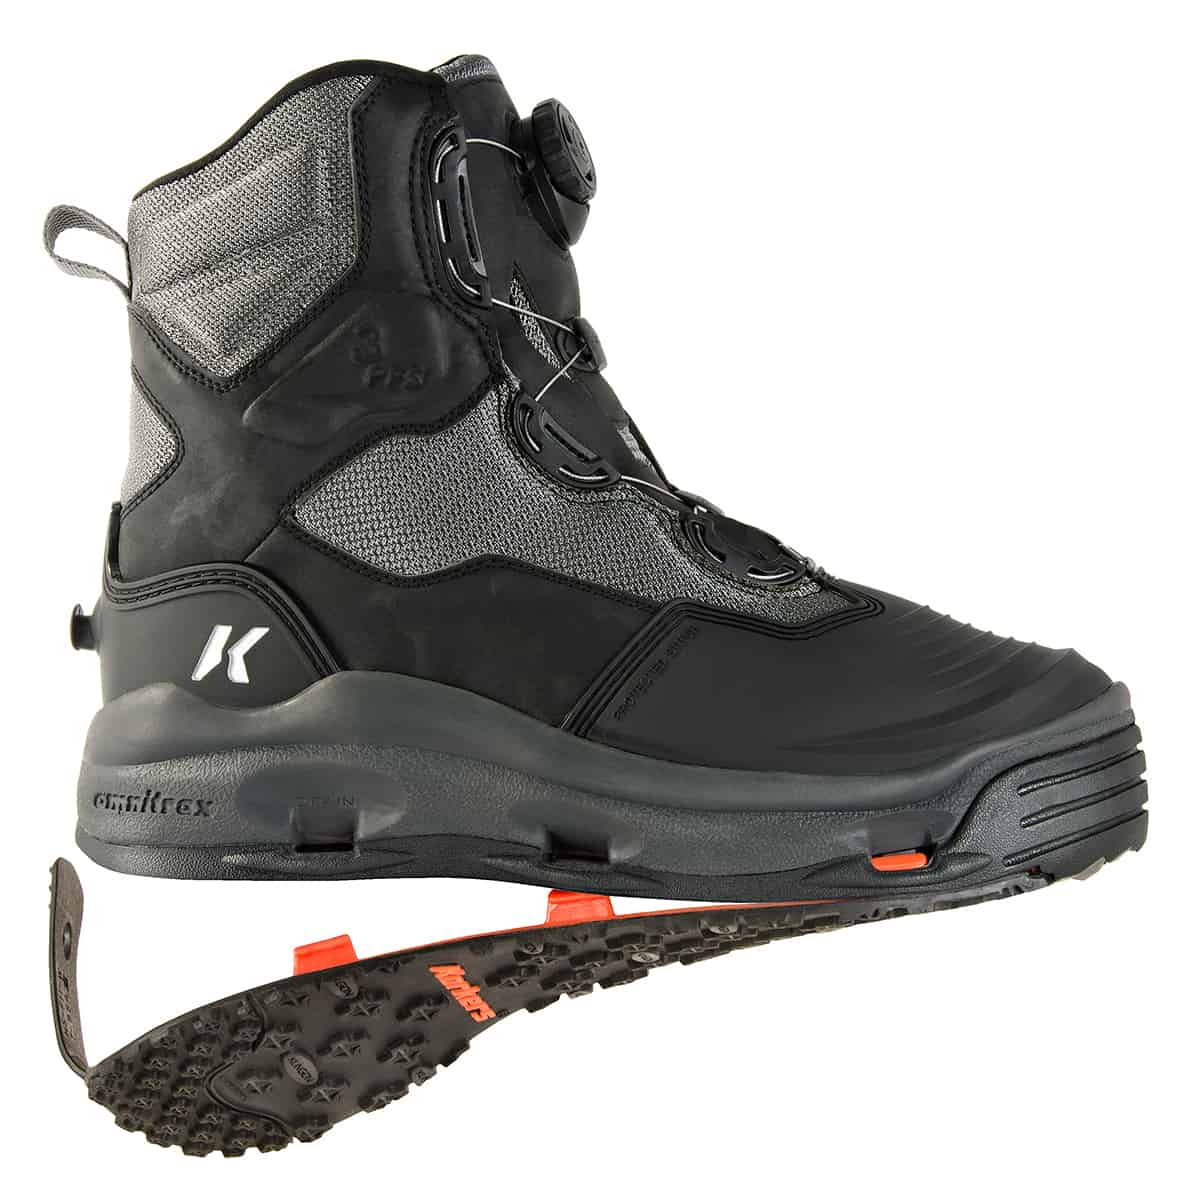 korkers darkhorse wading boot with interchangeable soles fishing wading boot with boa lacing